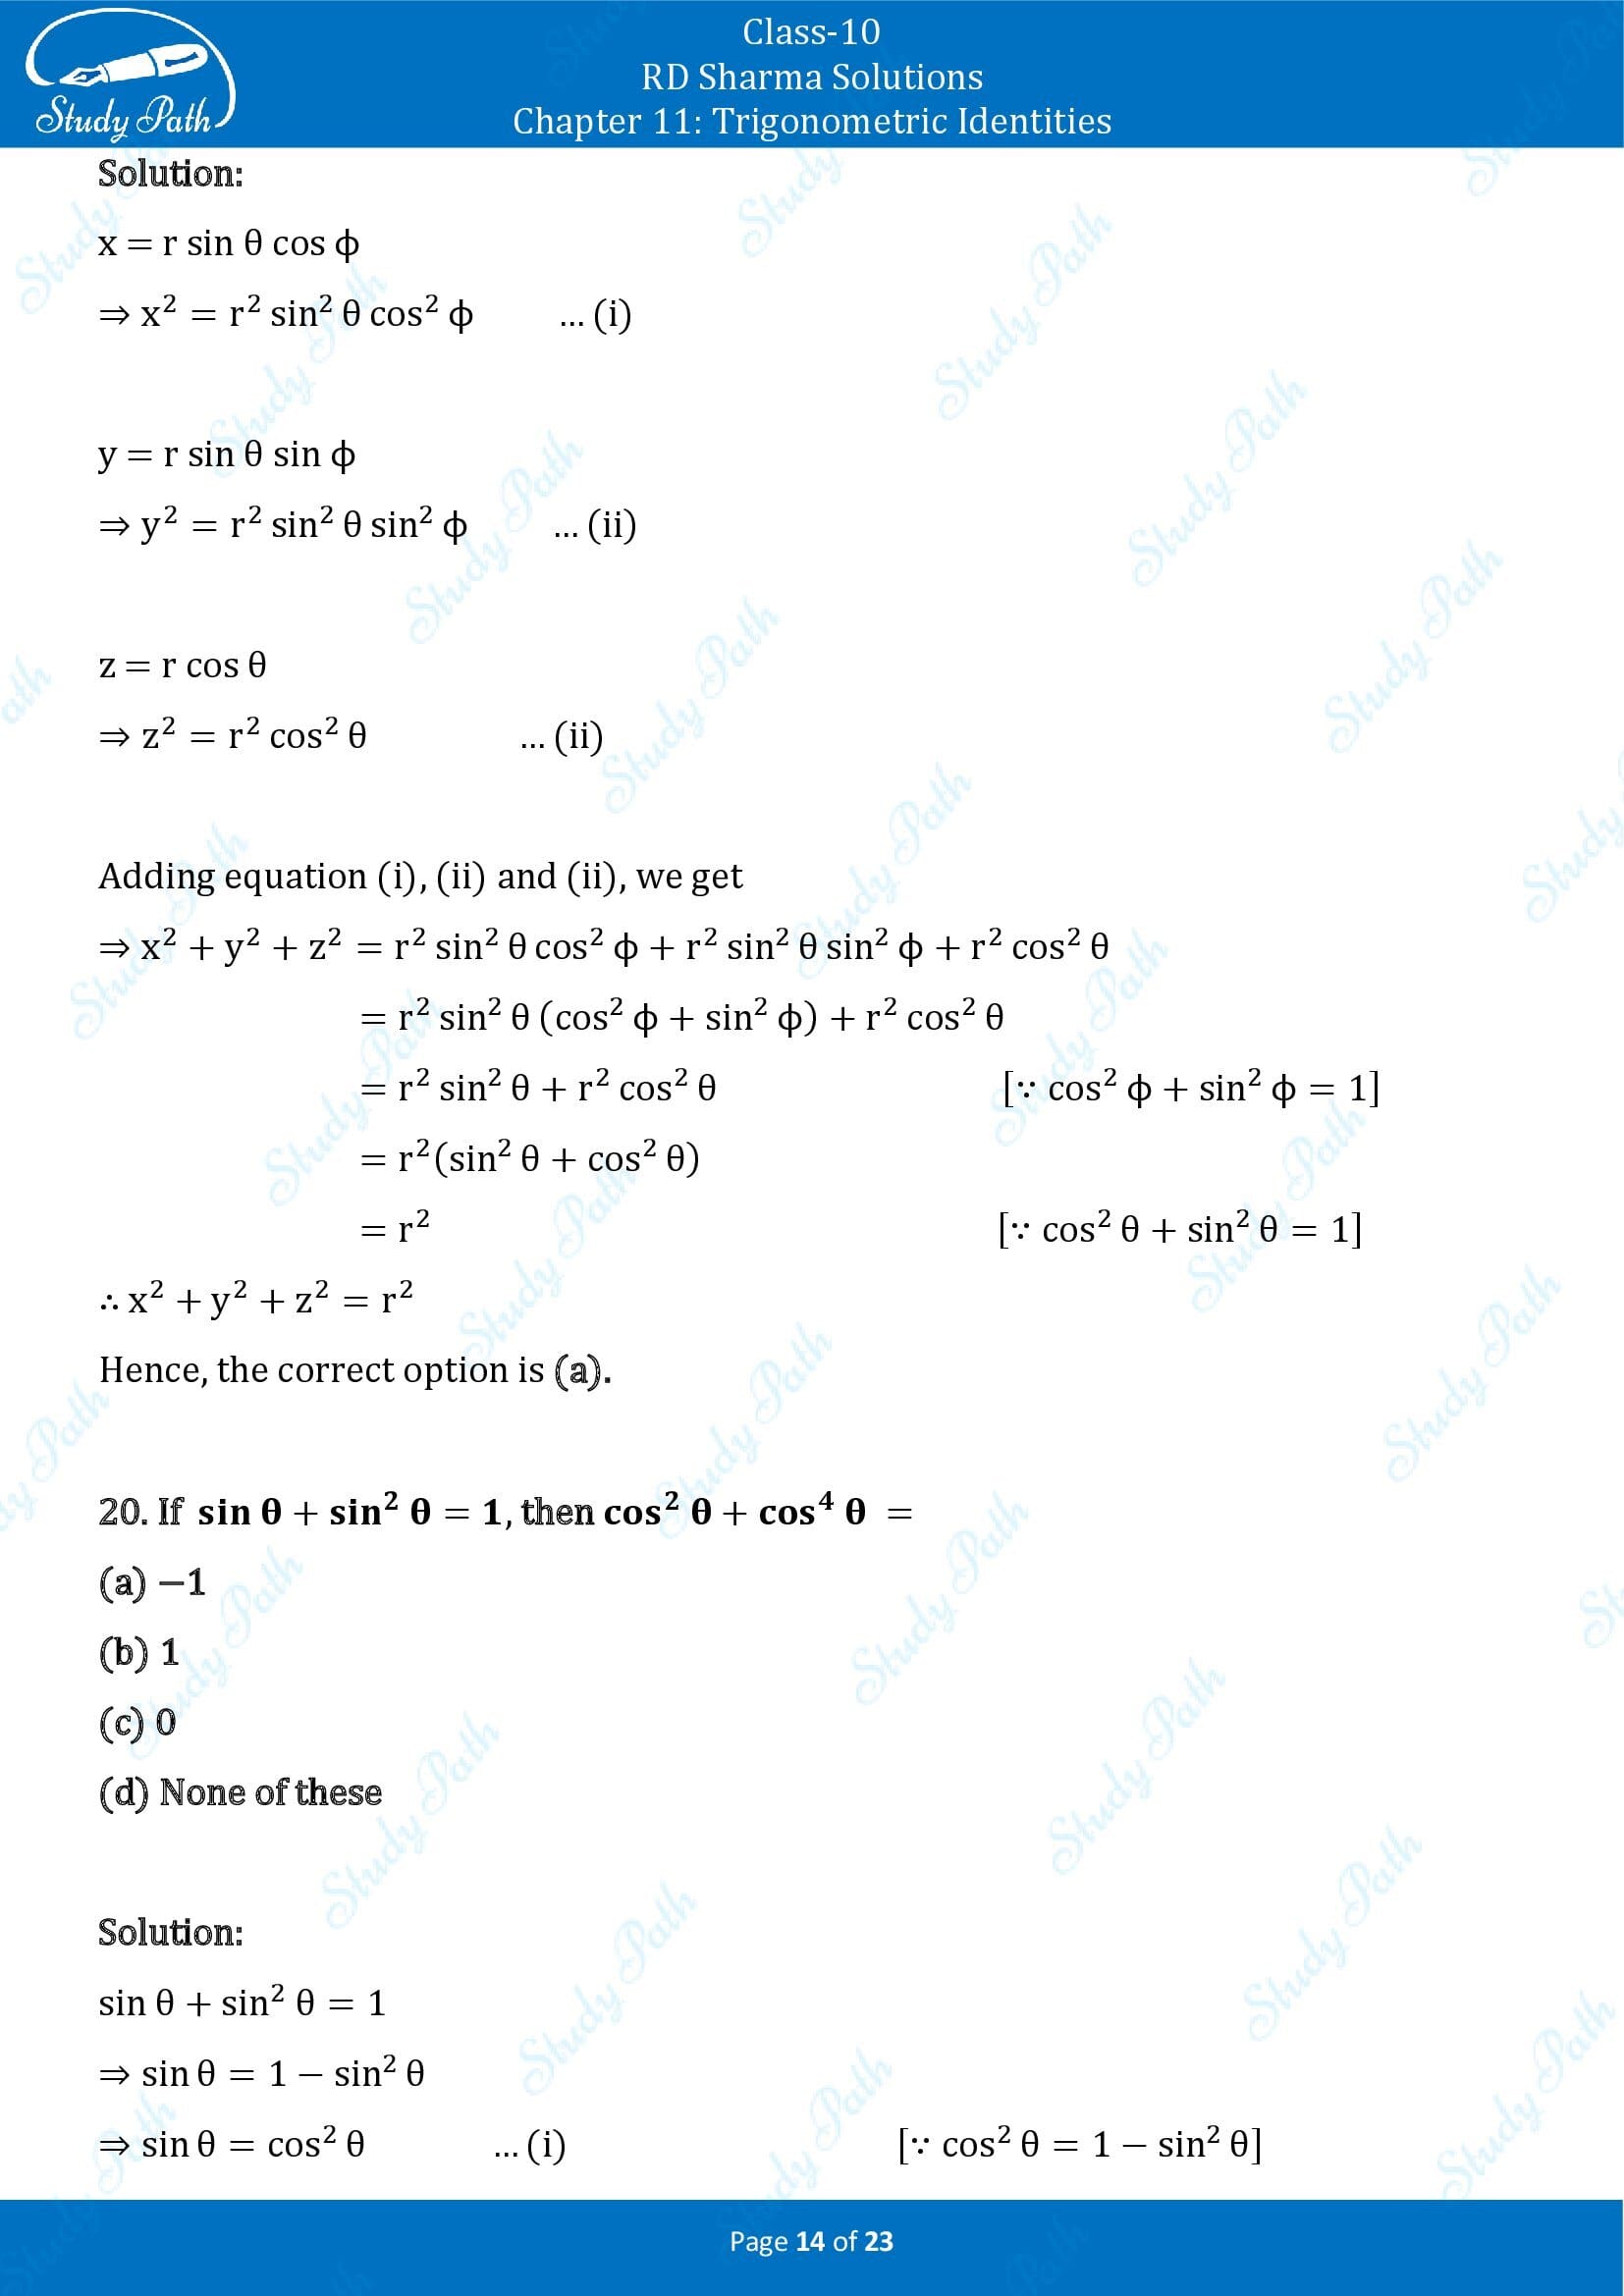 RD Sharma Solutions Class 10 Chapter 11 Trigonometric Identities Multiple Choice Questions MCQs 00014